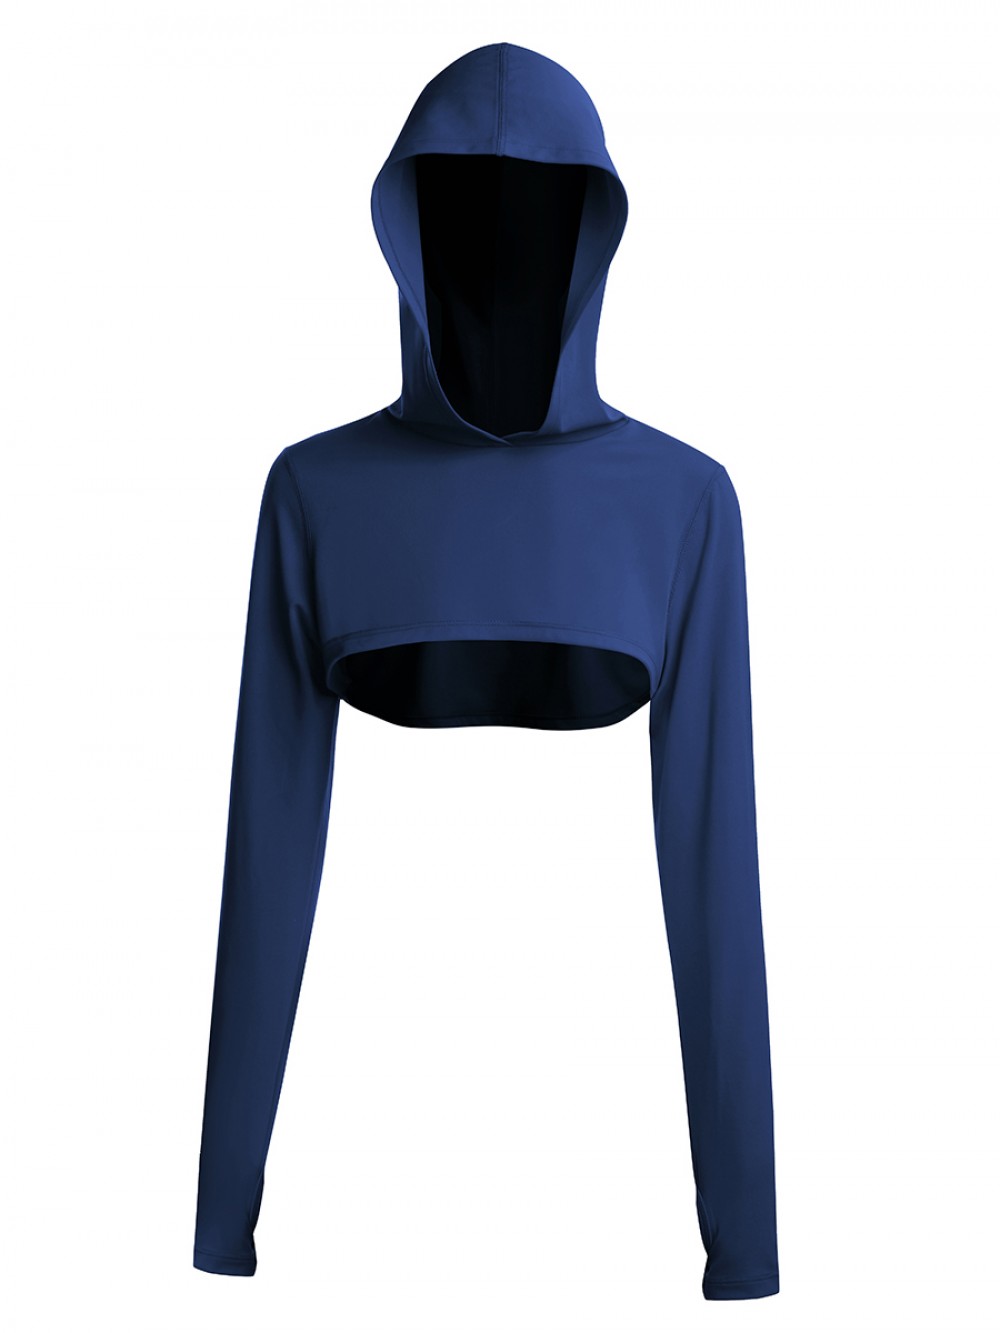 Navy Blue Thumbhole Full Sleeve Solid Color Gym Top For Women